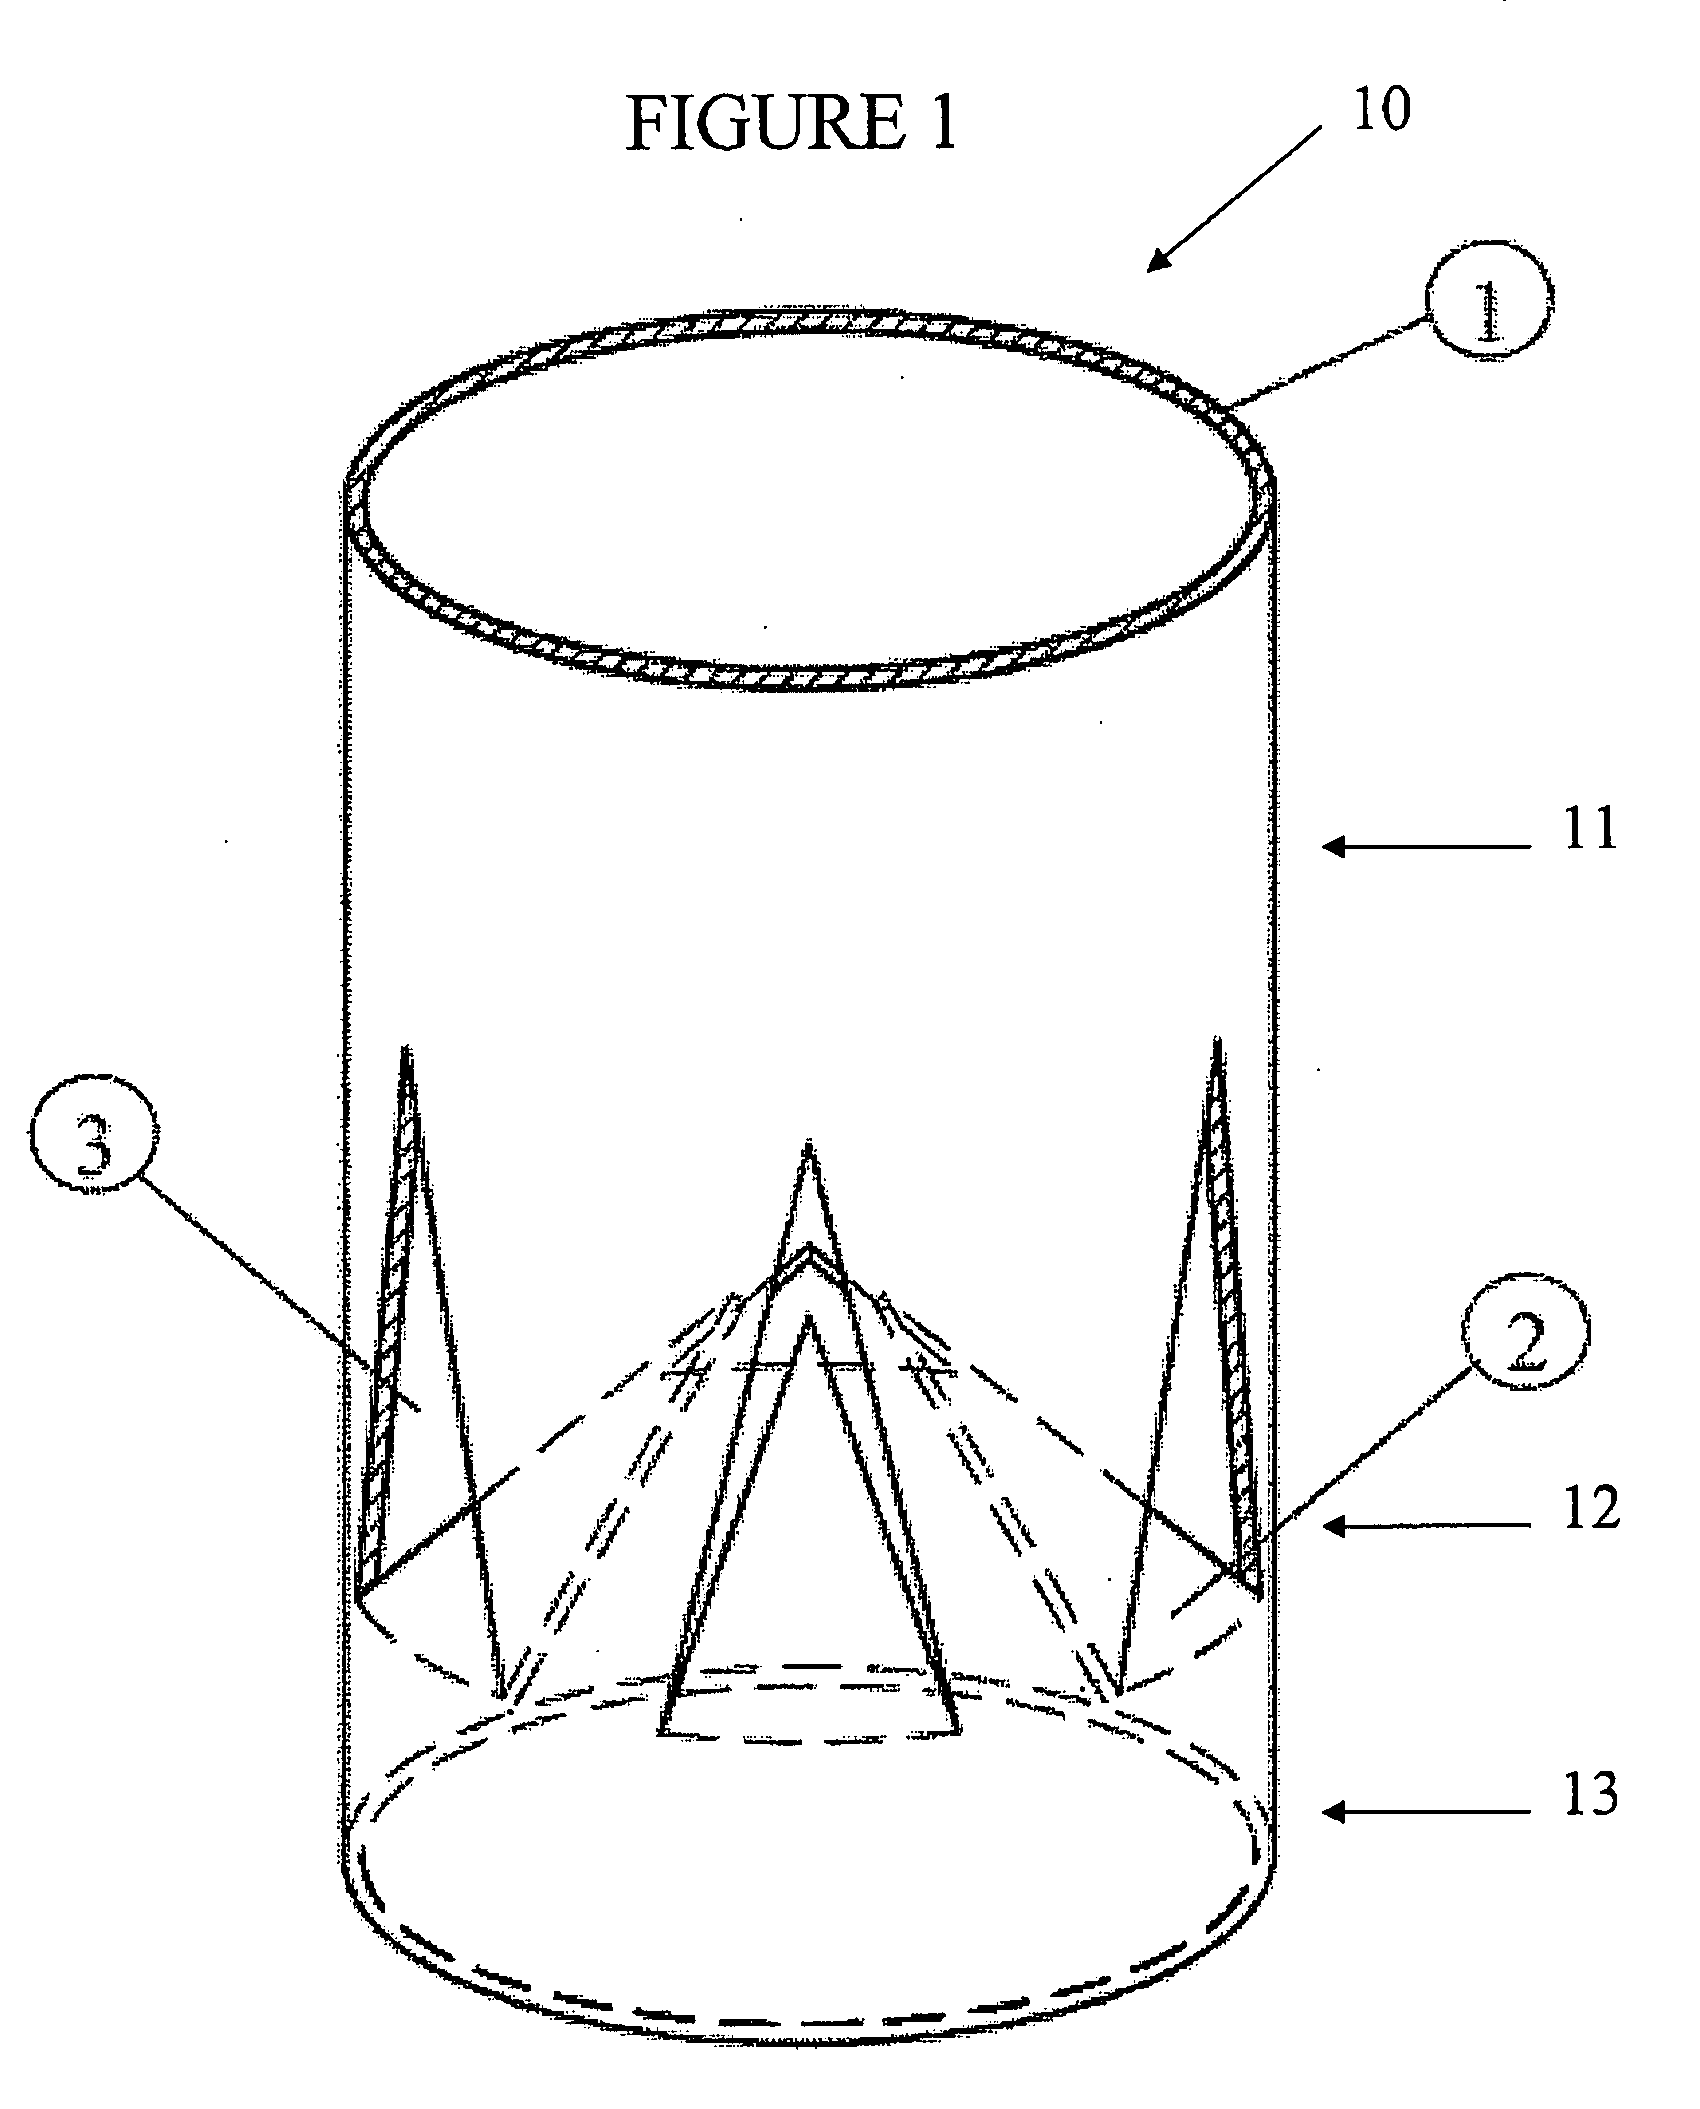 Apparatus, Systems and Methods For Facilitating Ignition Of A Solid Fuel